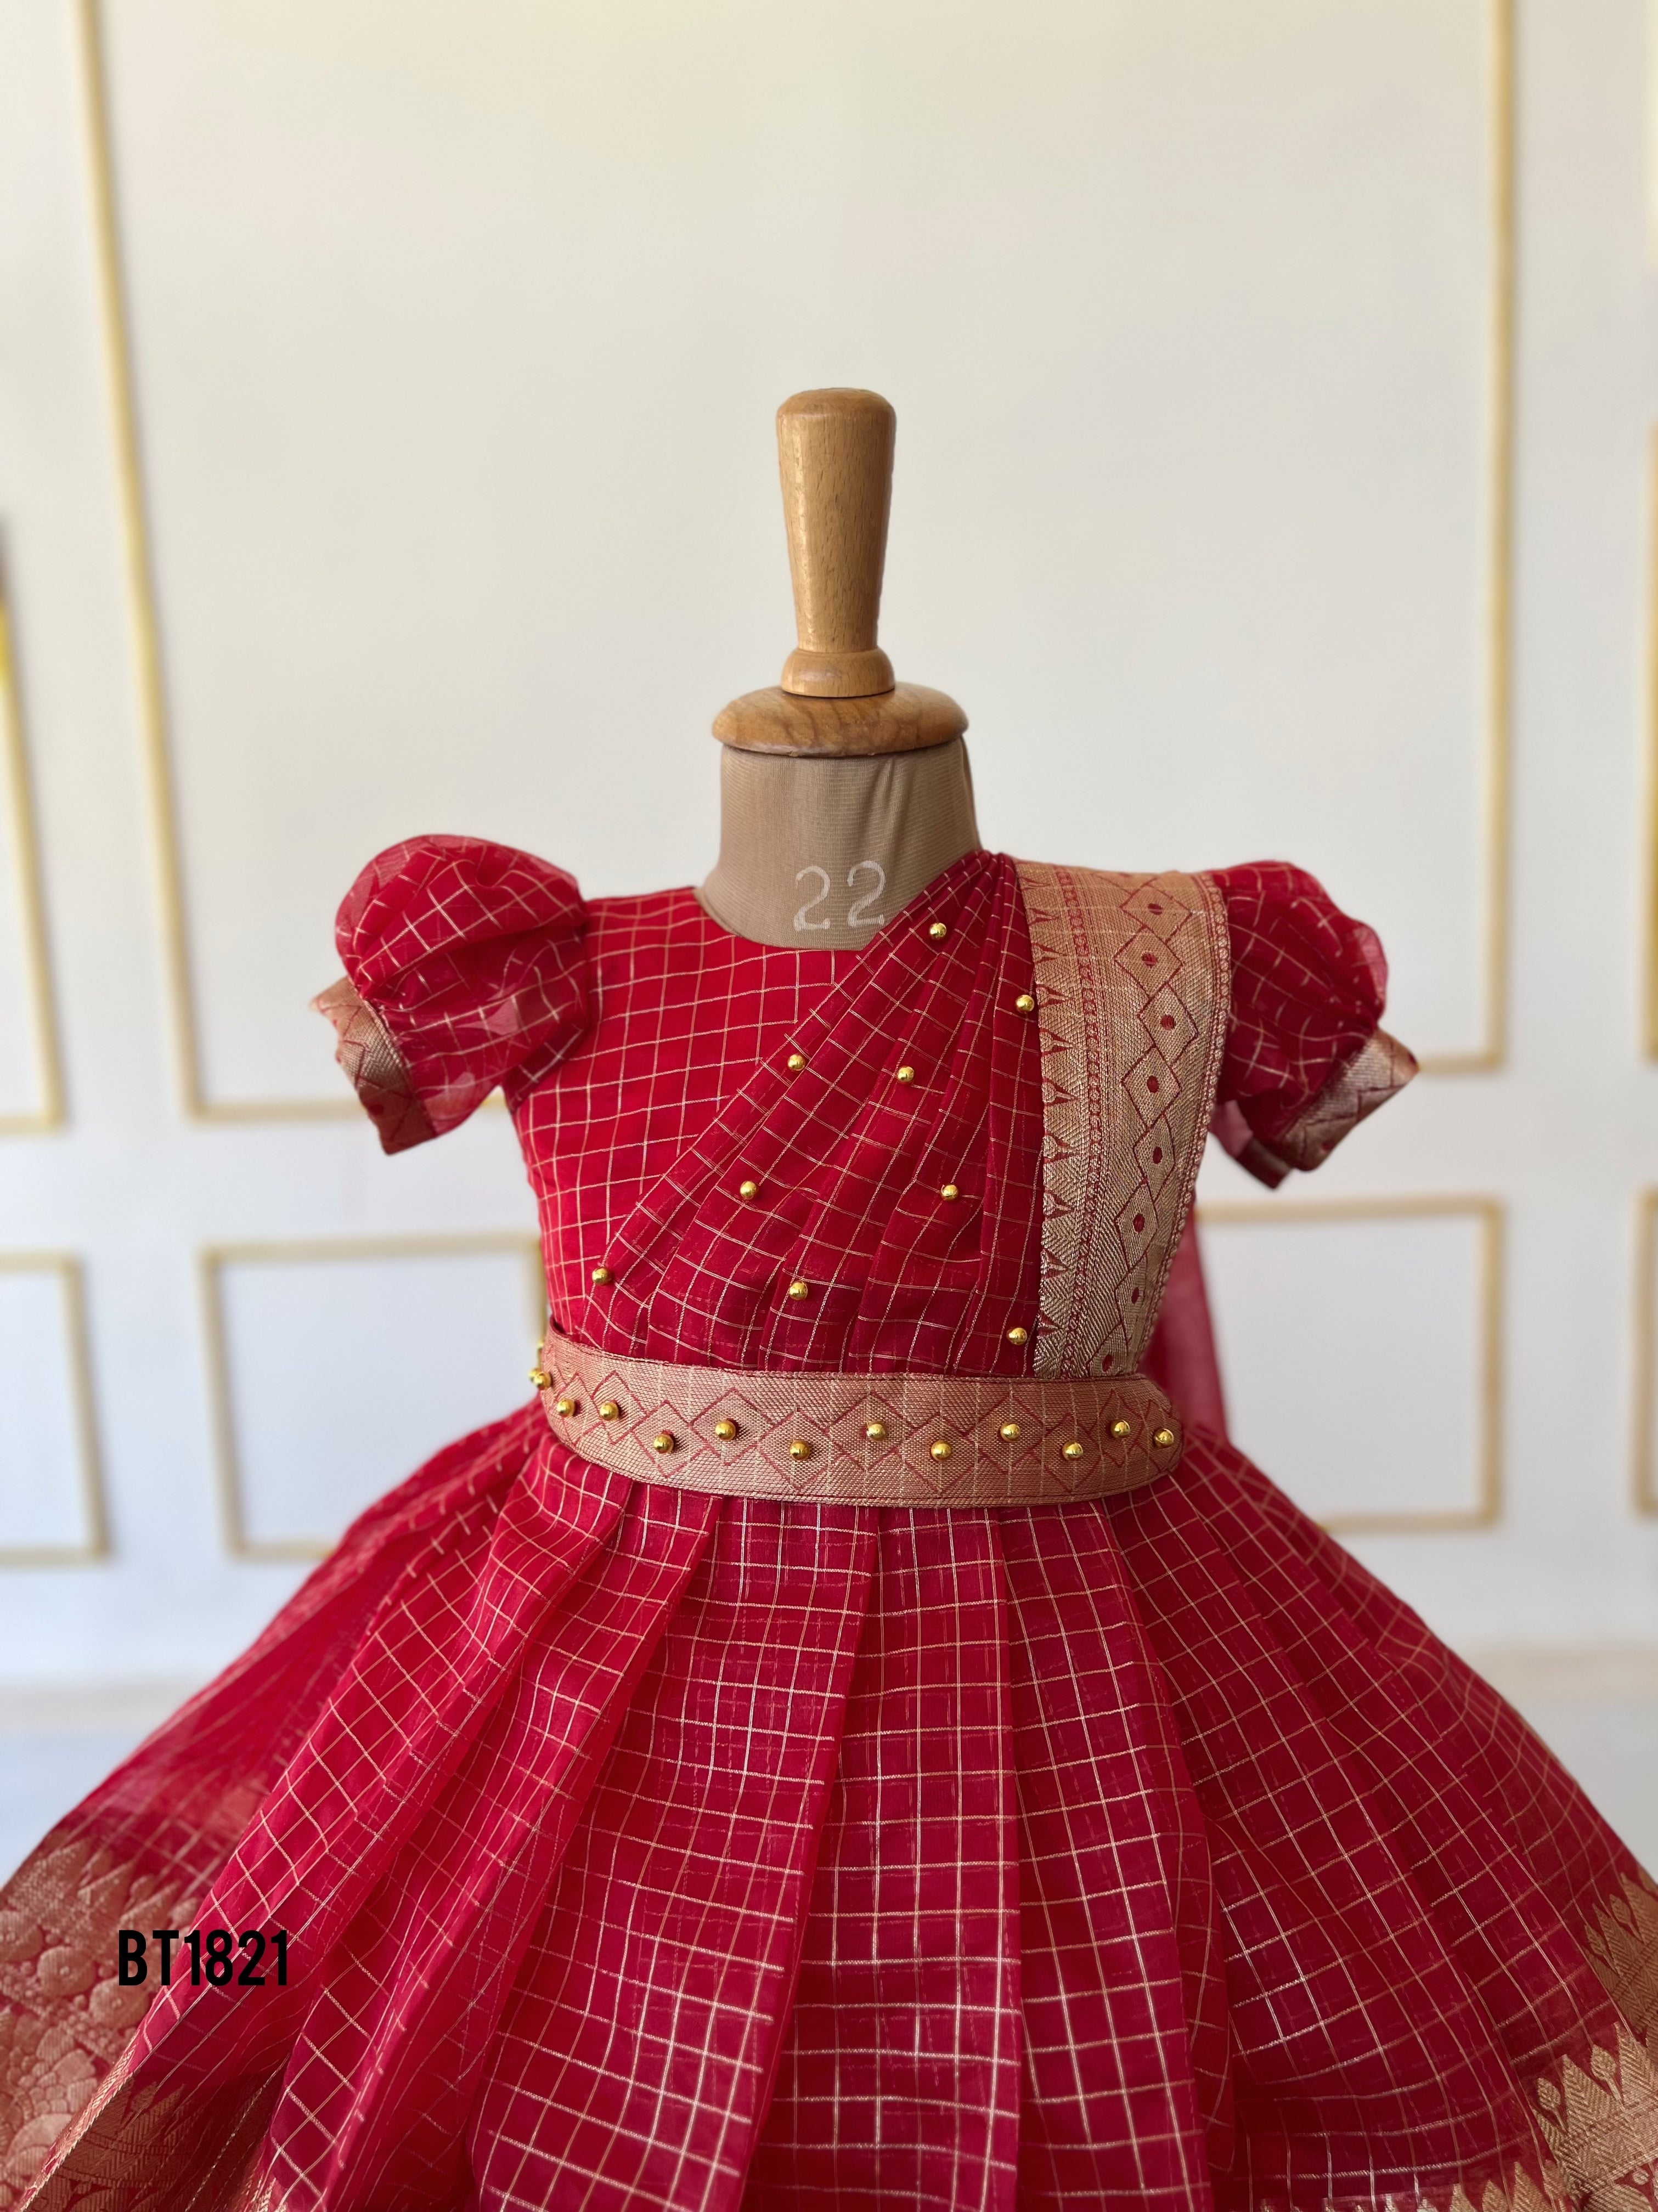 BT1821 Ethic Traditional Wear For Baby Girls